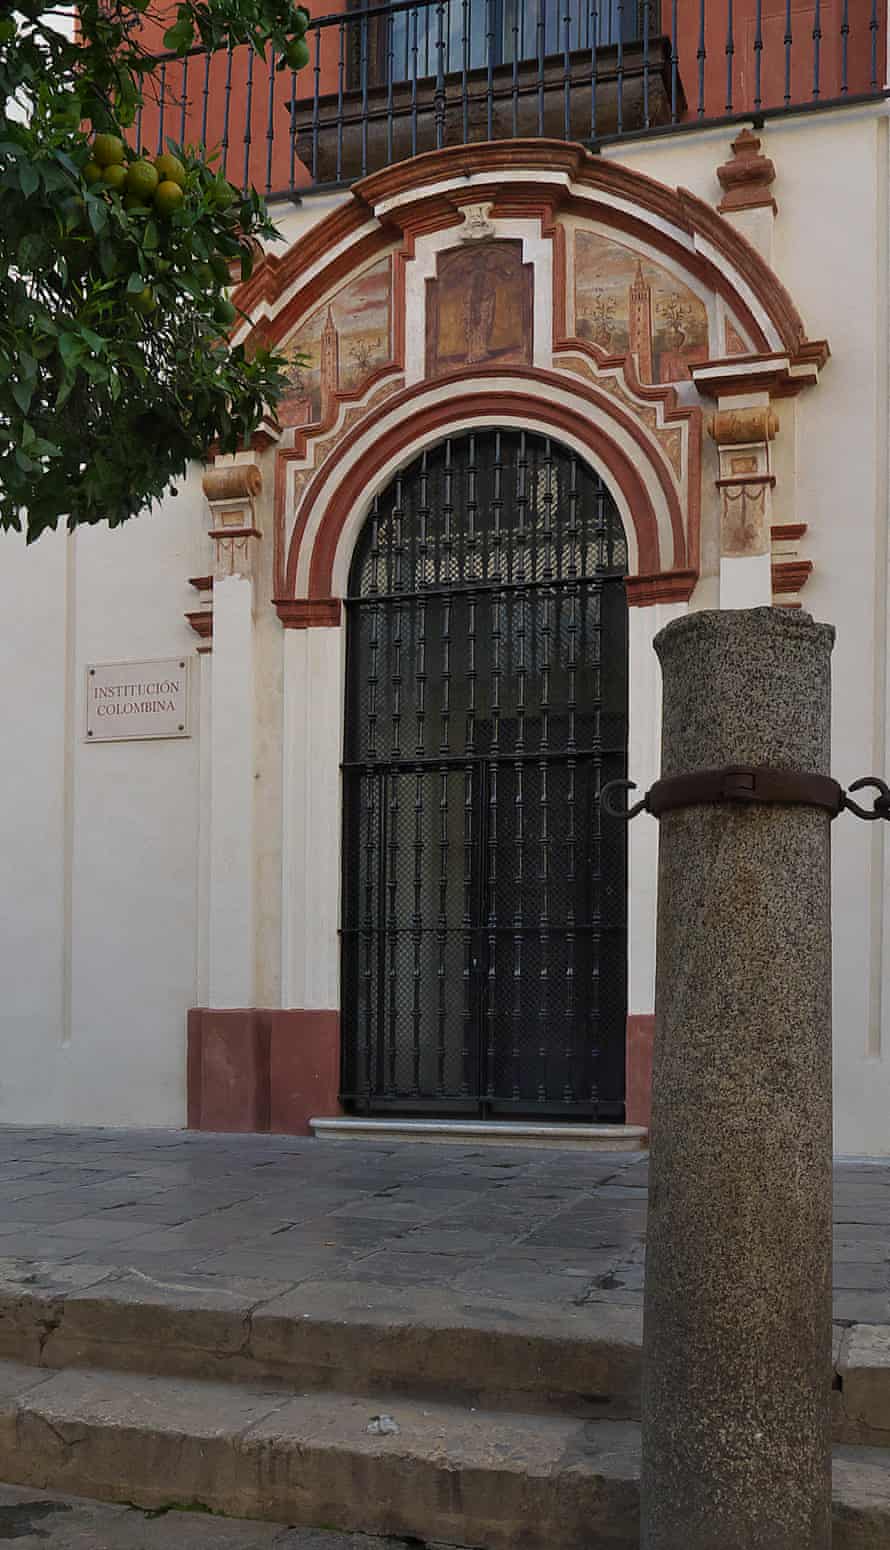 the entrance to the Institución Colombina in Seville, the current home to Colón’s library.